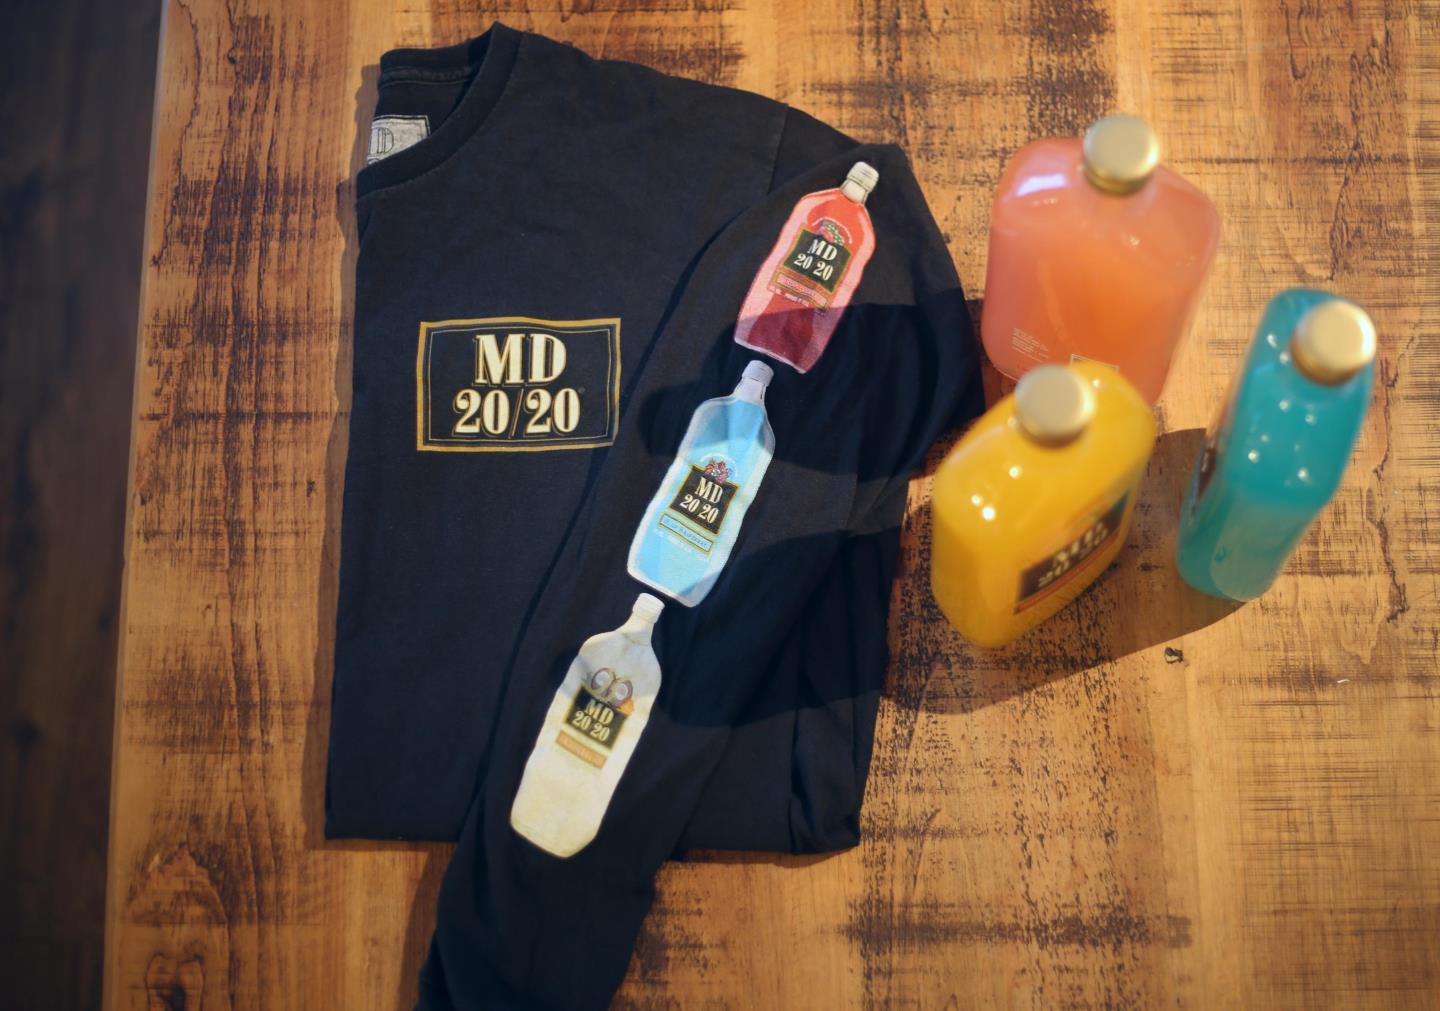 three bottles of mad dog MD 20/20 next to a MD 20/20 T-shirt